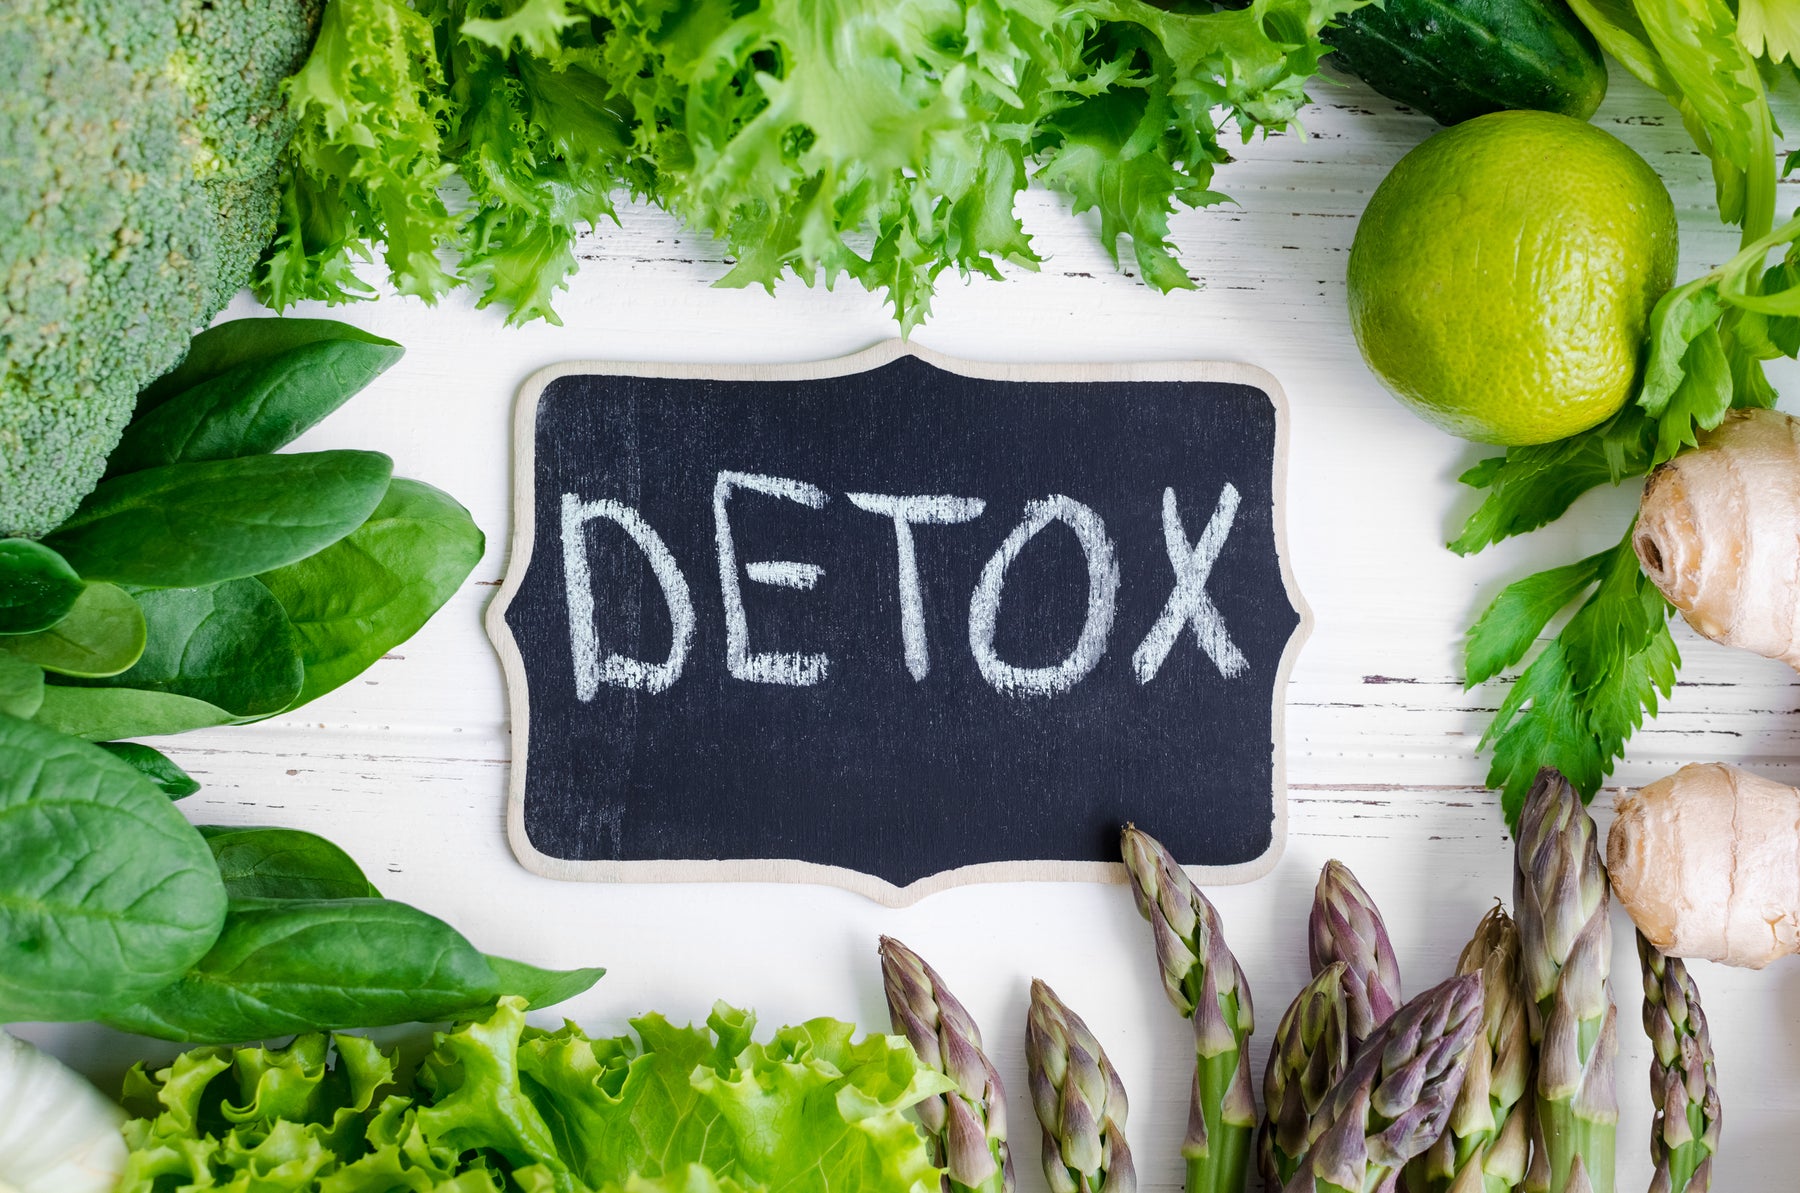 Body detox - make sure you're eating these key nutrients